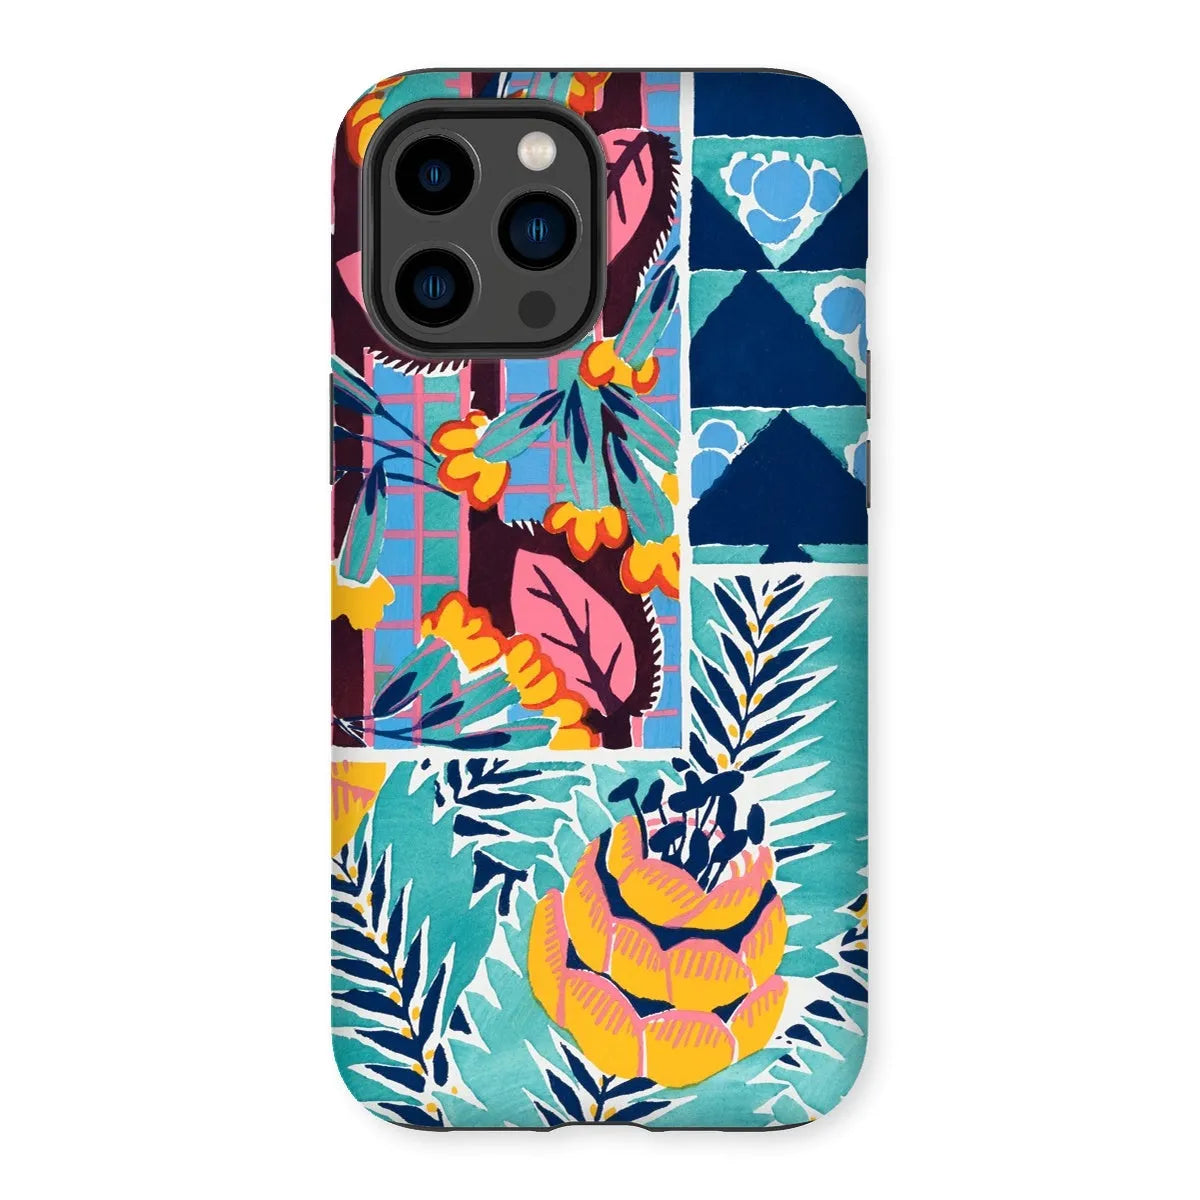 Fabric & Rugs - Pochoir Patterns Phone Case - E. A. Séguy - Iphone 14 Pro Max / Matte - Mobile Phone Cases